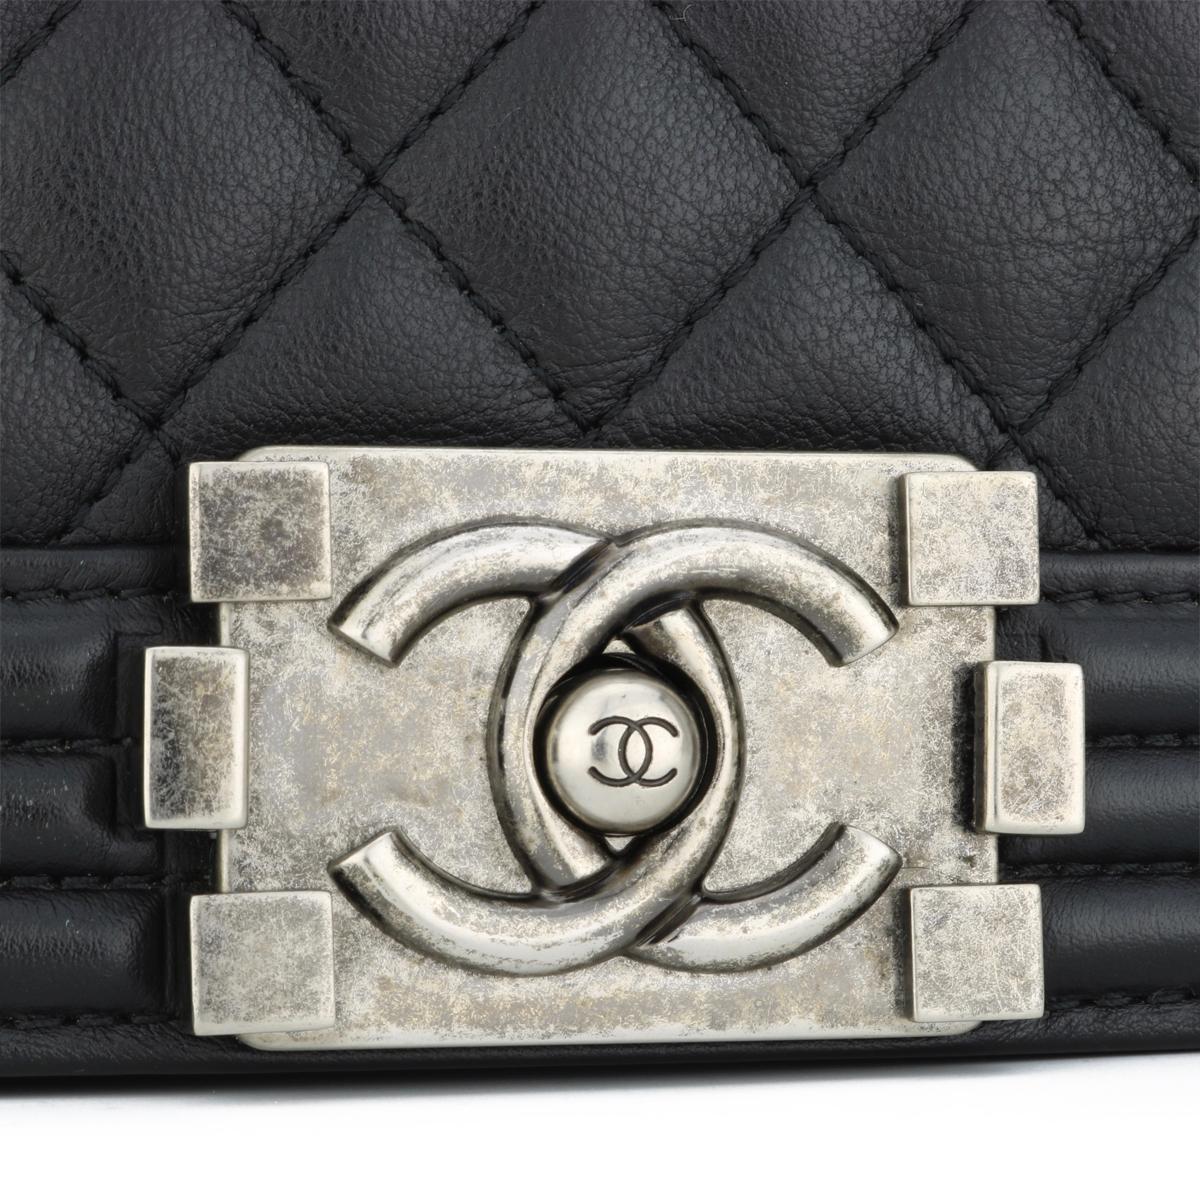 Women's or Men's CHANEL New Medium Quilted Boy Bag in Black Calfskin with Ruthenium Hardware 2015 For Sale